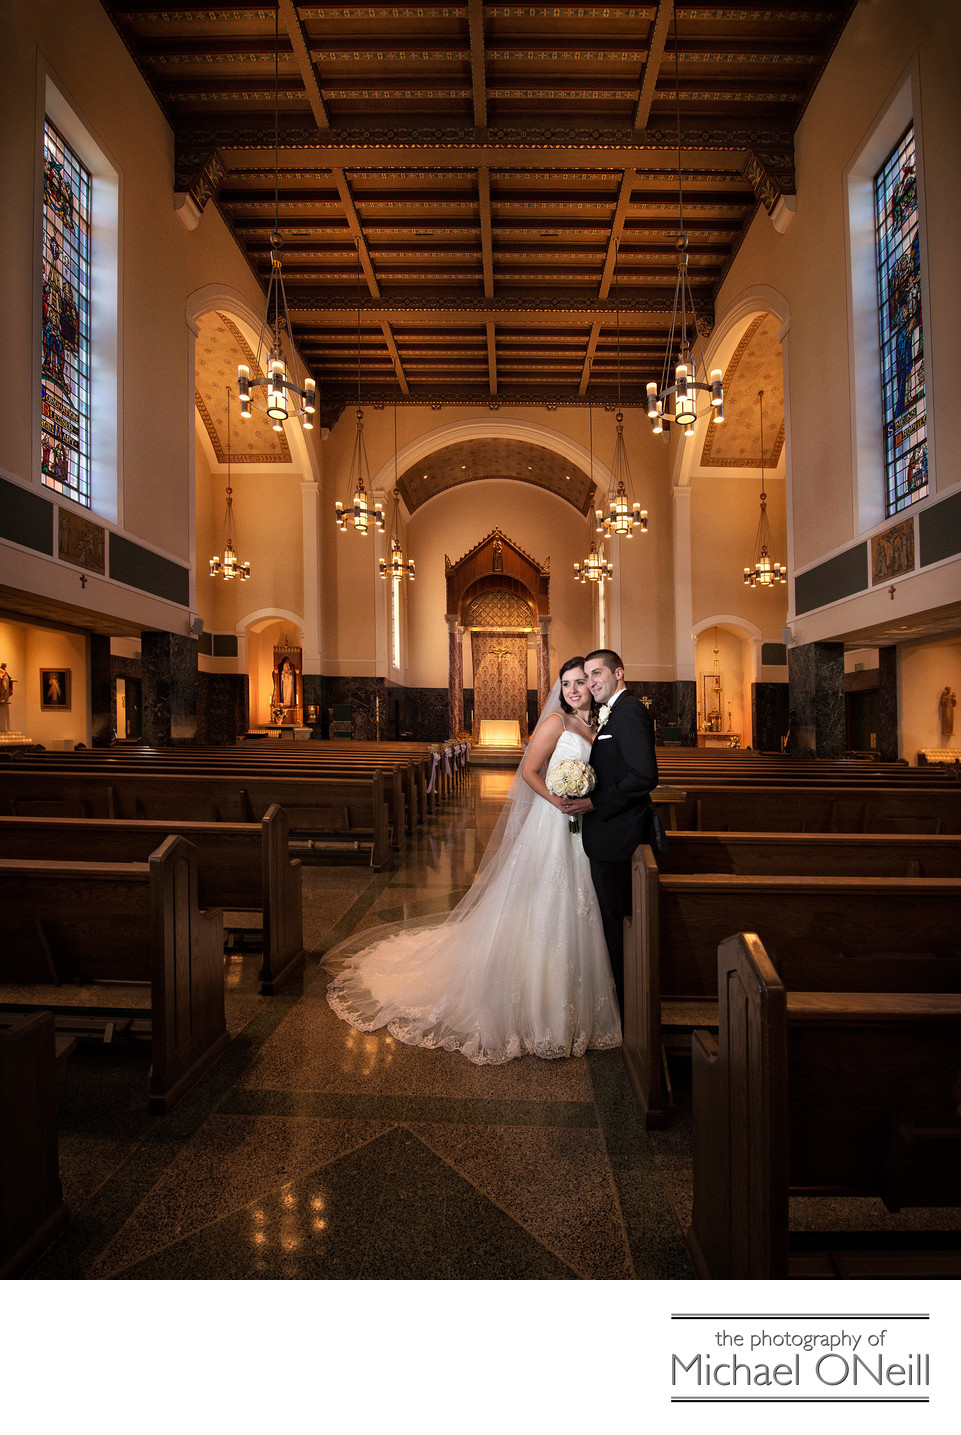 Best Church Wedding Pictures Long Island